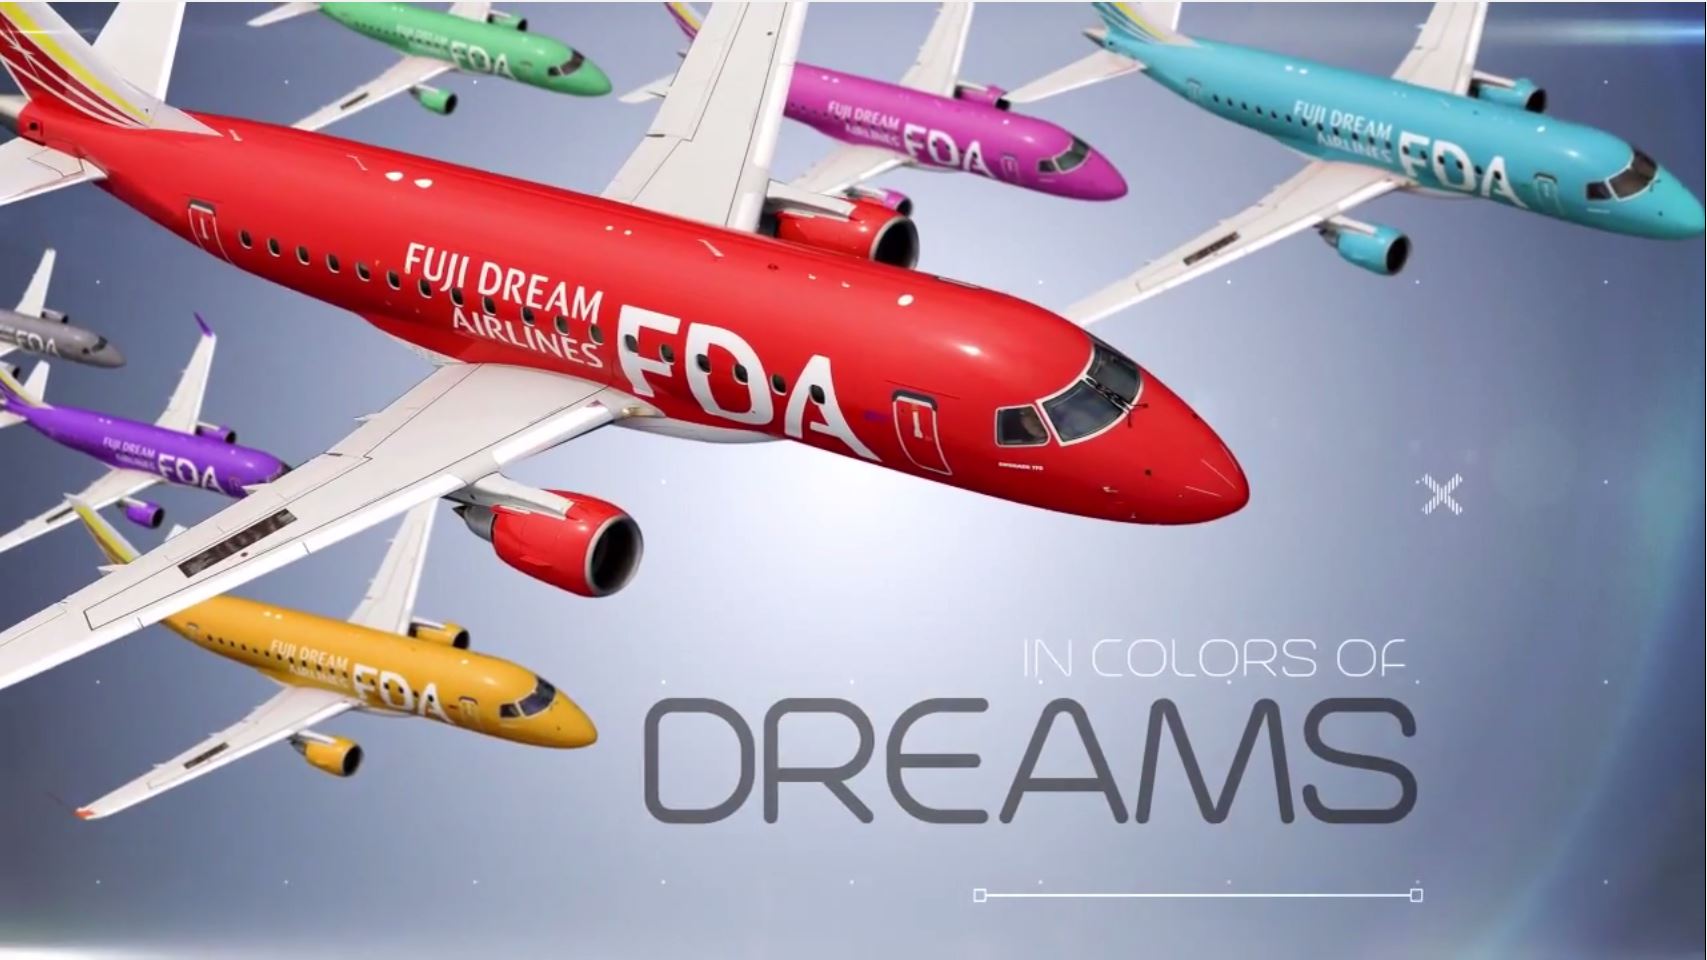 Fuji Dream Airlines – Dreaming Together